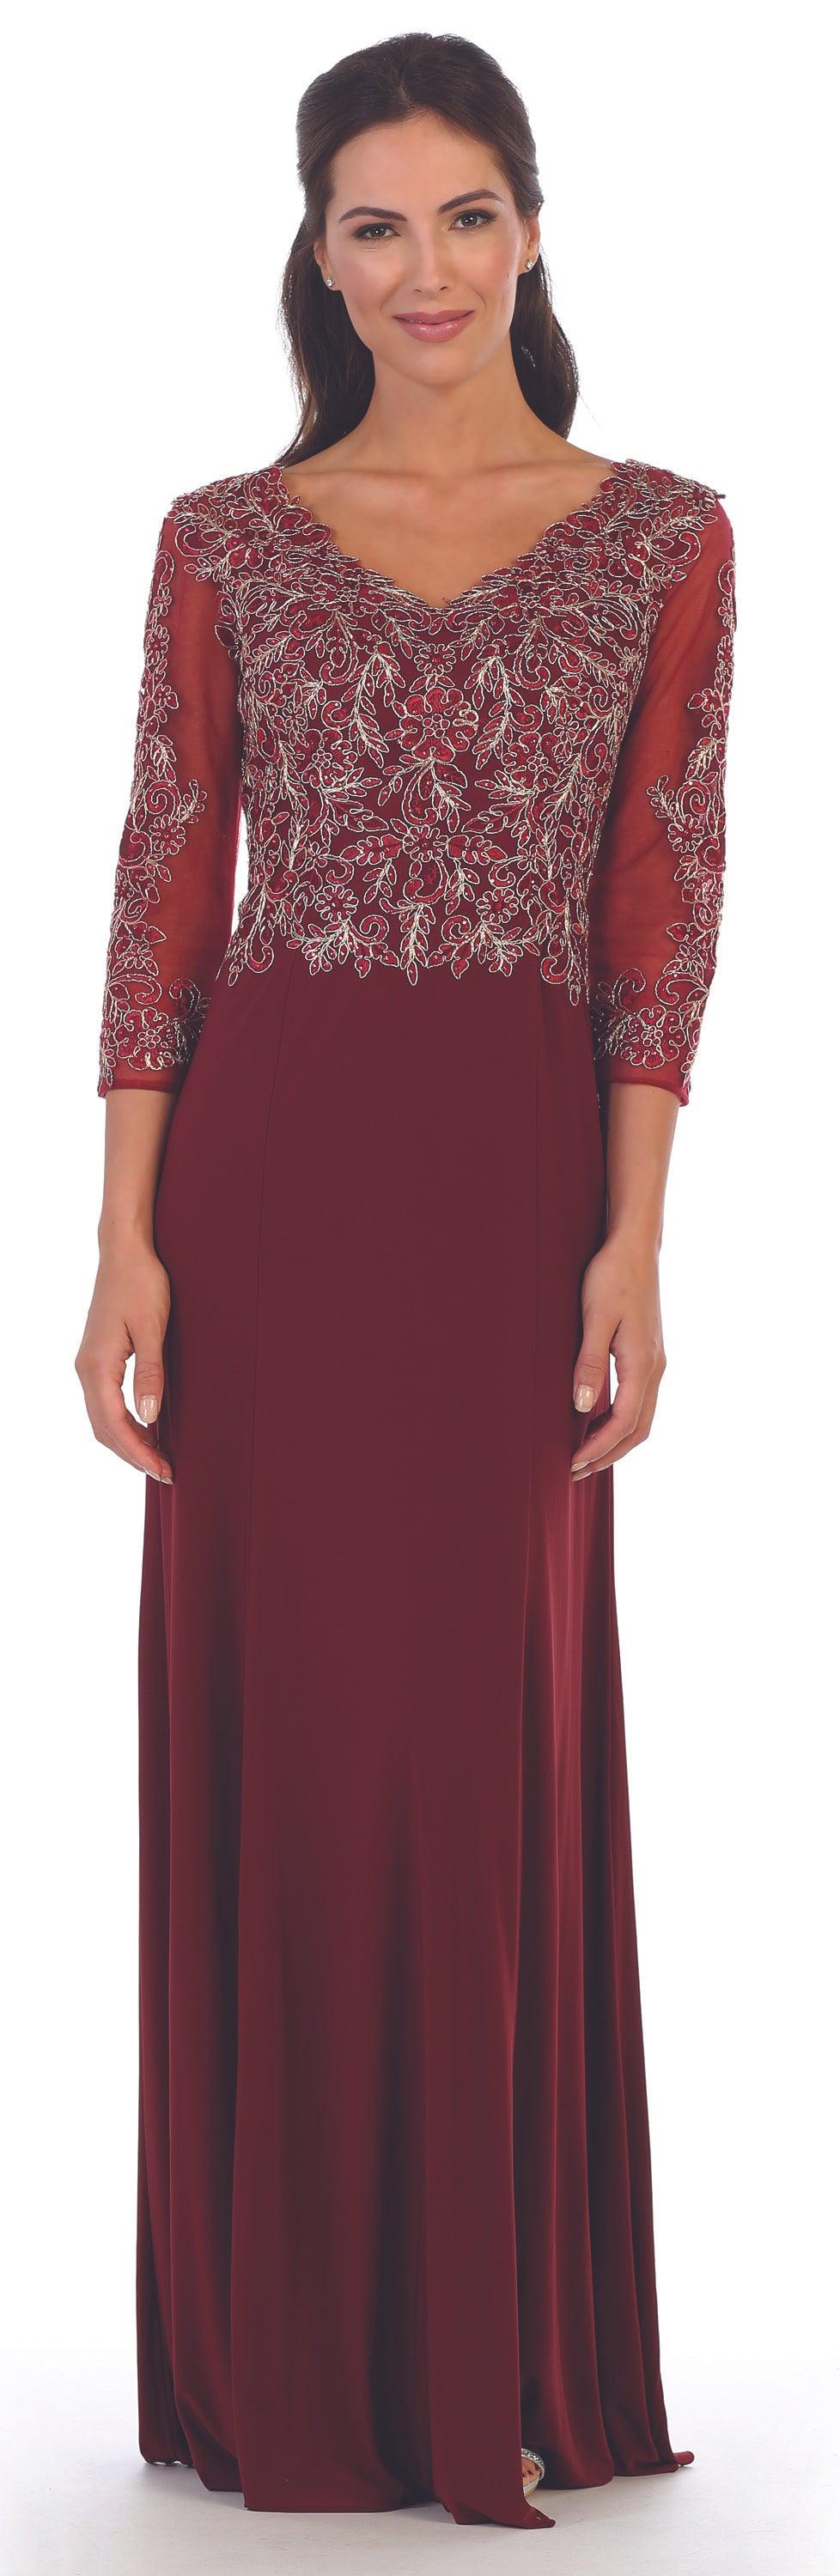 Long Mother of the Bride Long Sleeve Formal Dress - The Dress Outlet